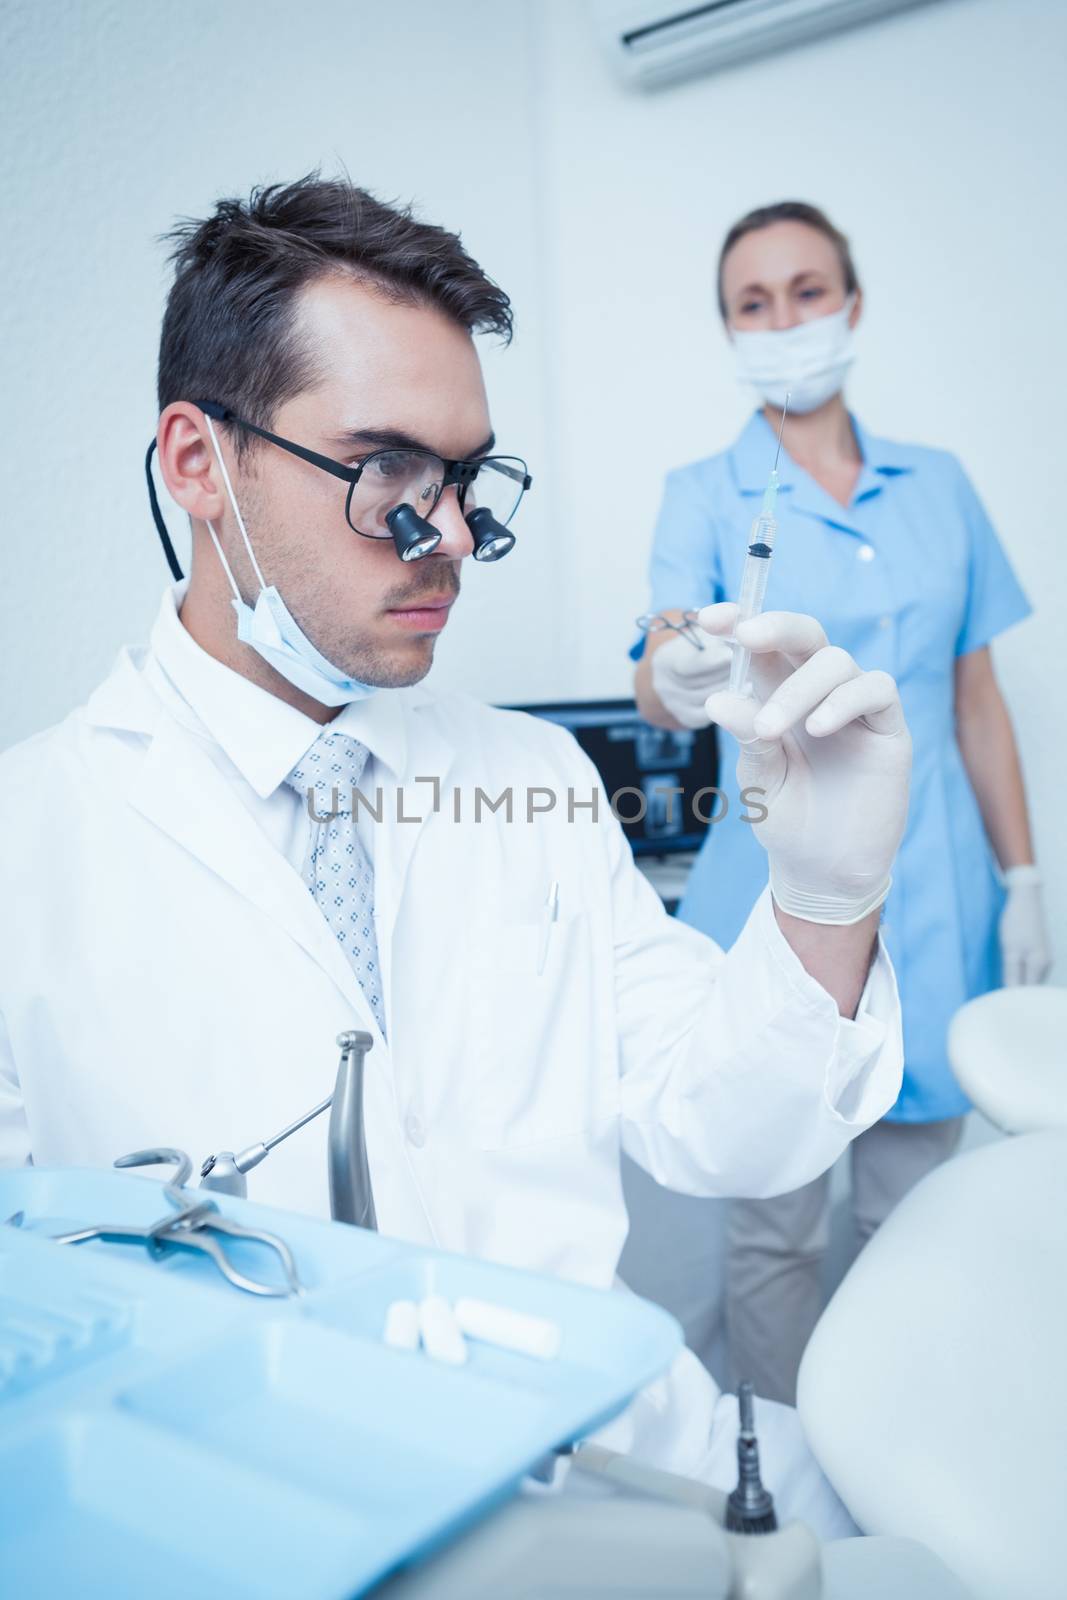 Concentrated male dentist looking at injection